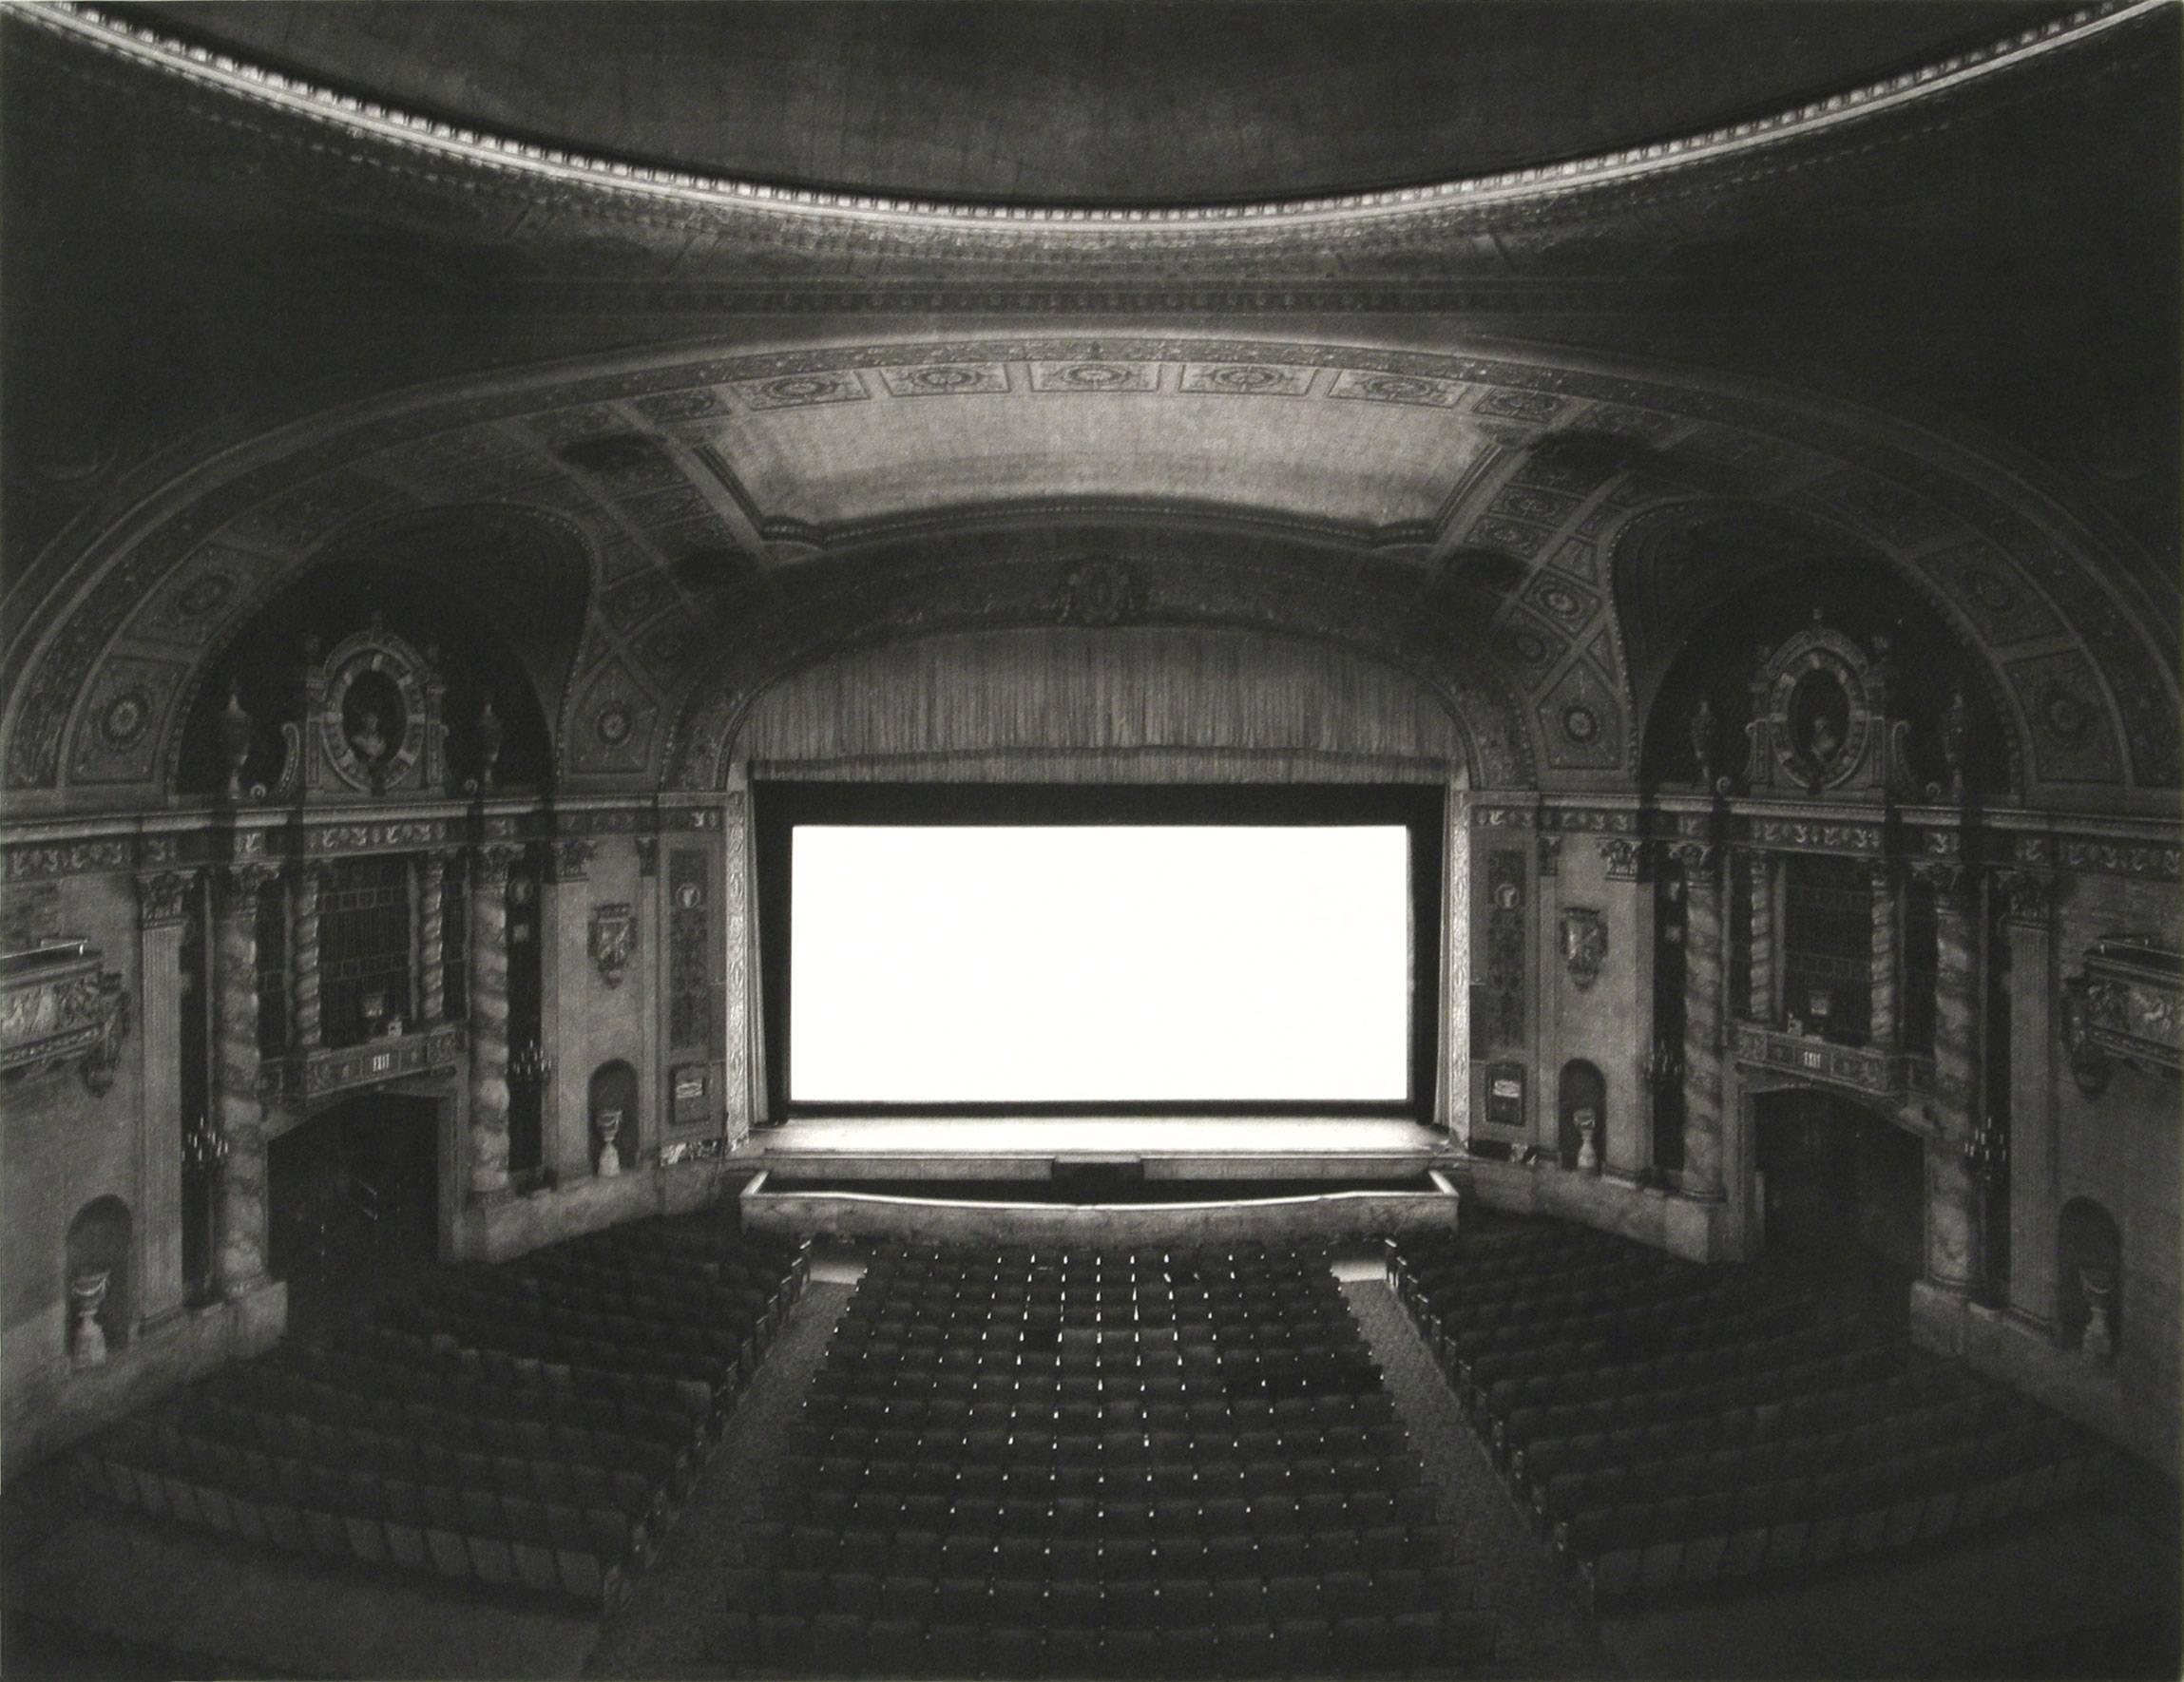 Hiroshi Sugimoto Black and White Photograph - HIROSHI SUGIMOTO: Theaters [Deluxe Edition with Signed Photogravure]